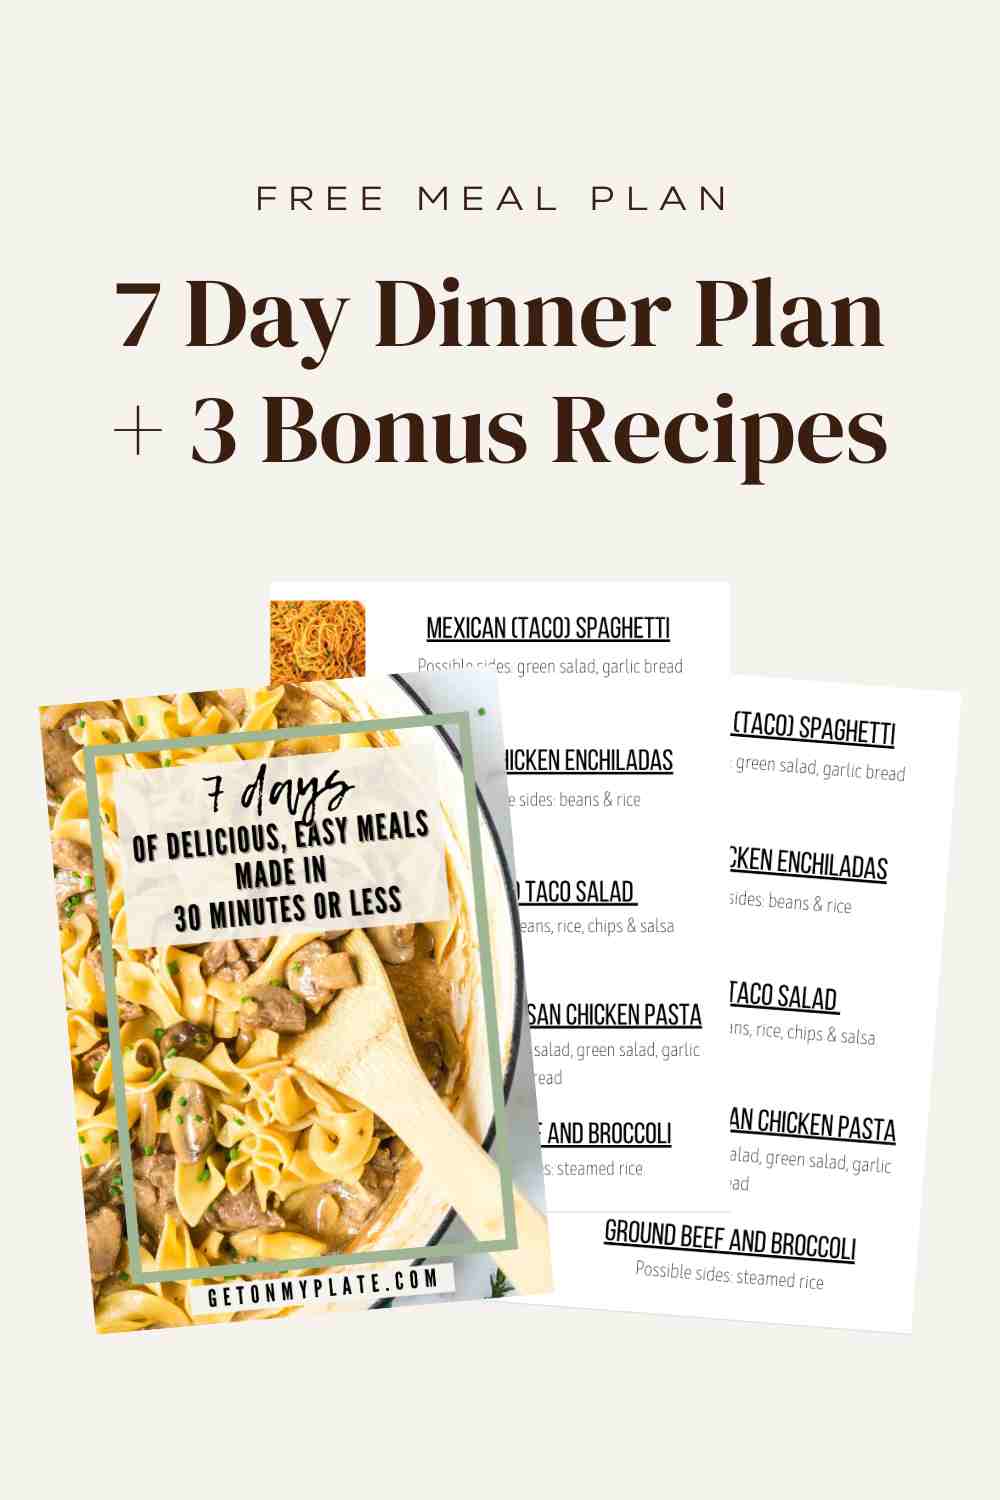 Screenshots of 7 day dinner planners.